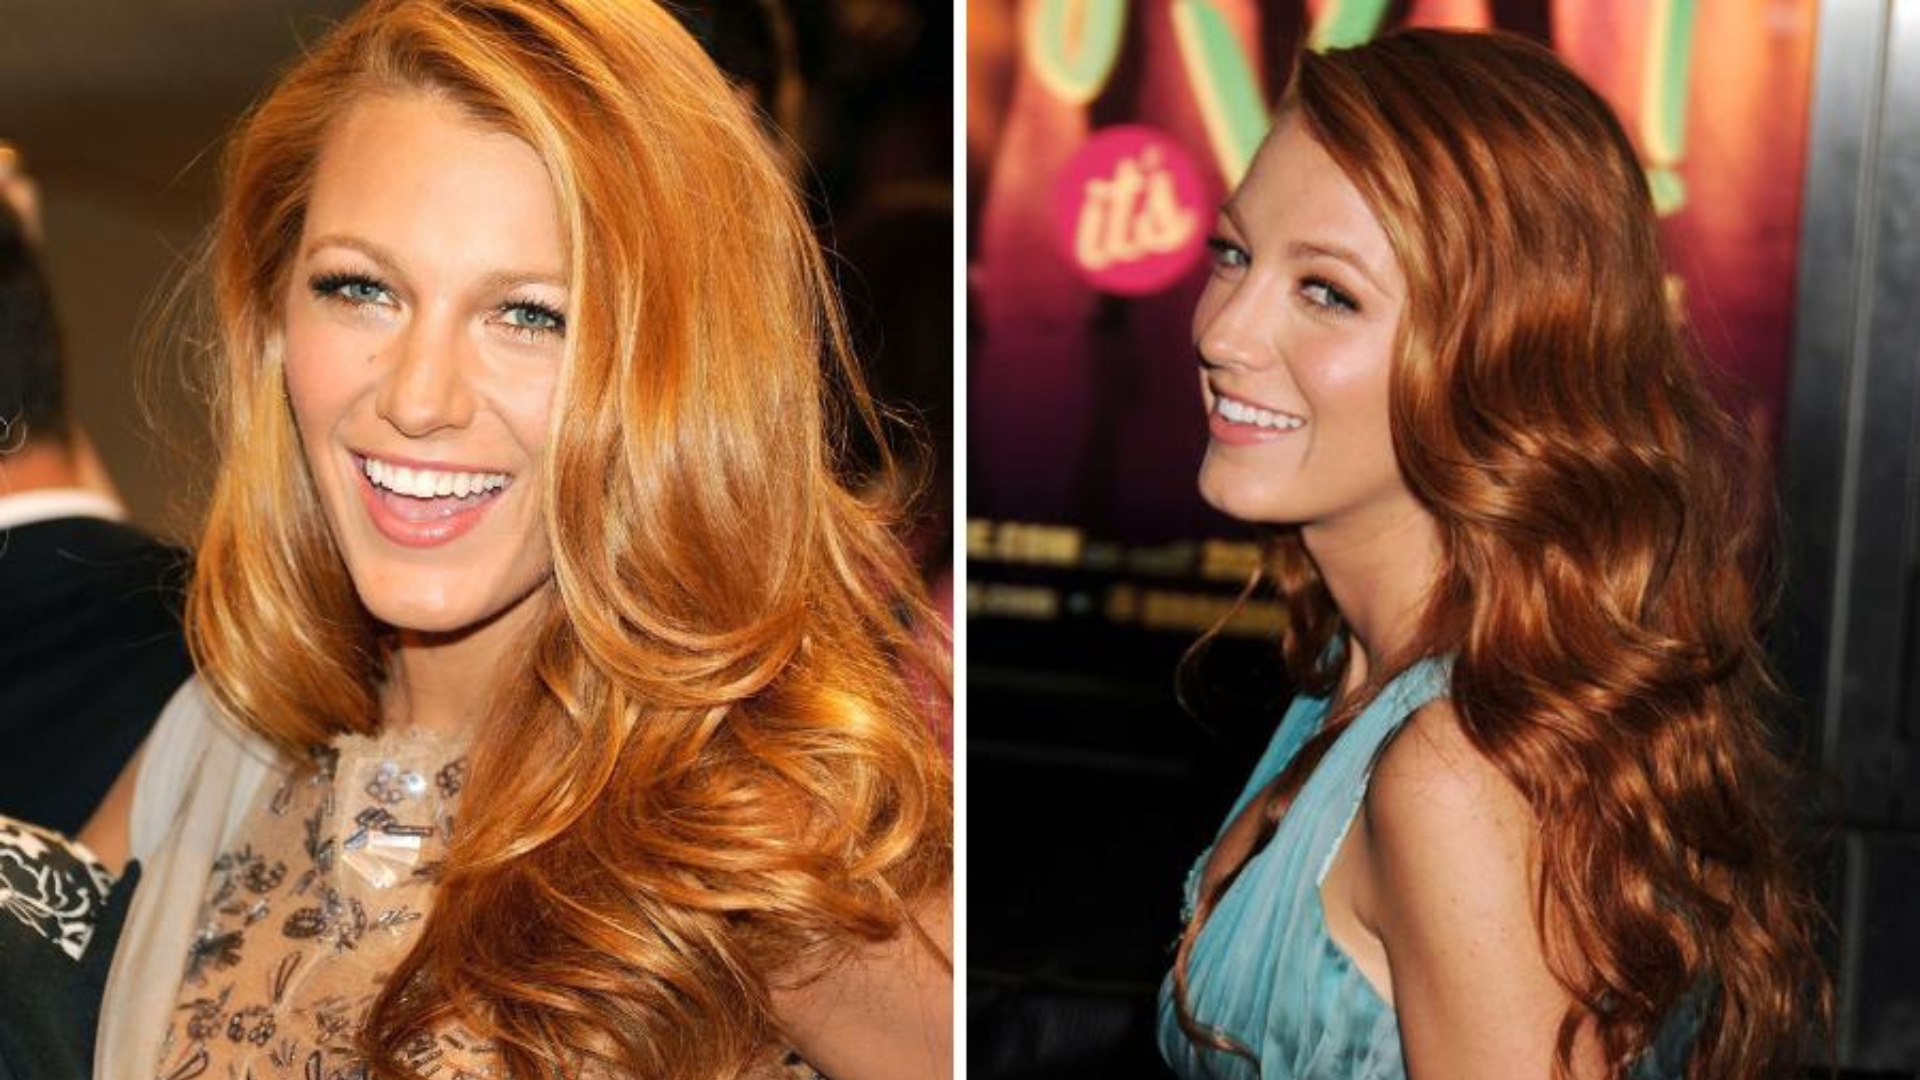 Blake Lively Debuts Red Hair and Confirms “It Ends With Us” Casting News